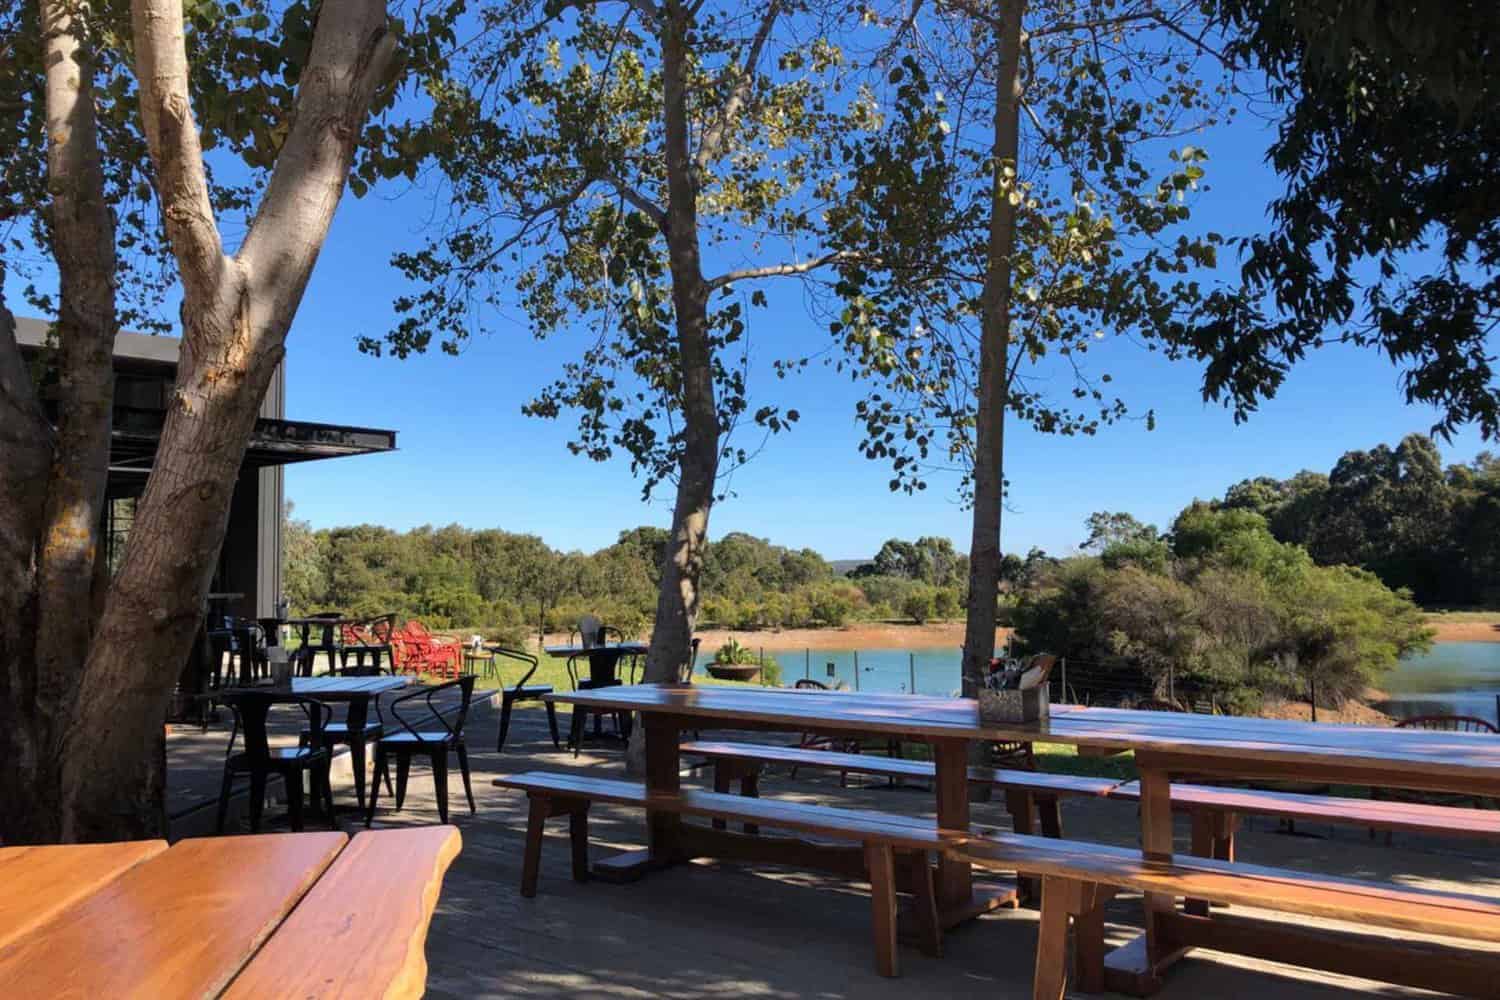 A serene view from a Margaret River Brewery, looking over the outdoor tables onto a peaceful lake with Australian bush in the distance. The lake is surrounded by trees, creating a tranquil and secluded atmosphere.